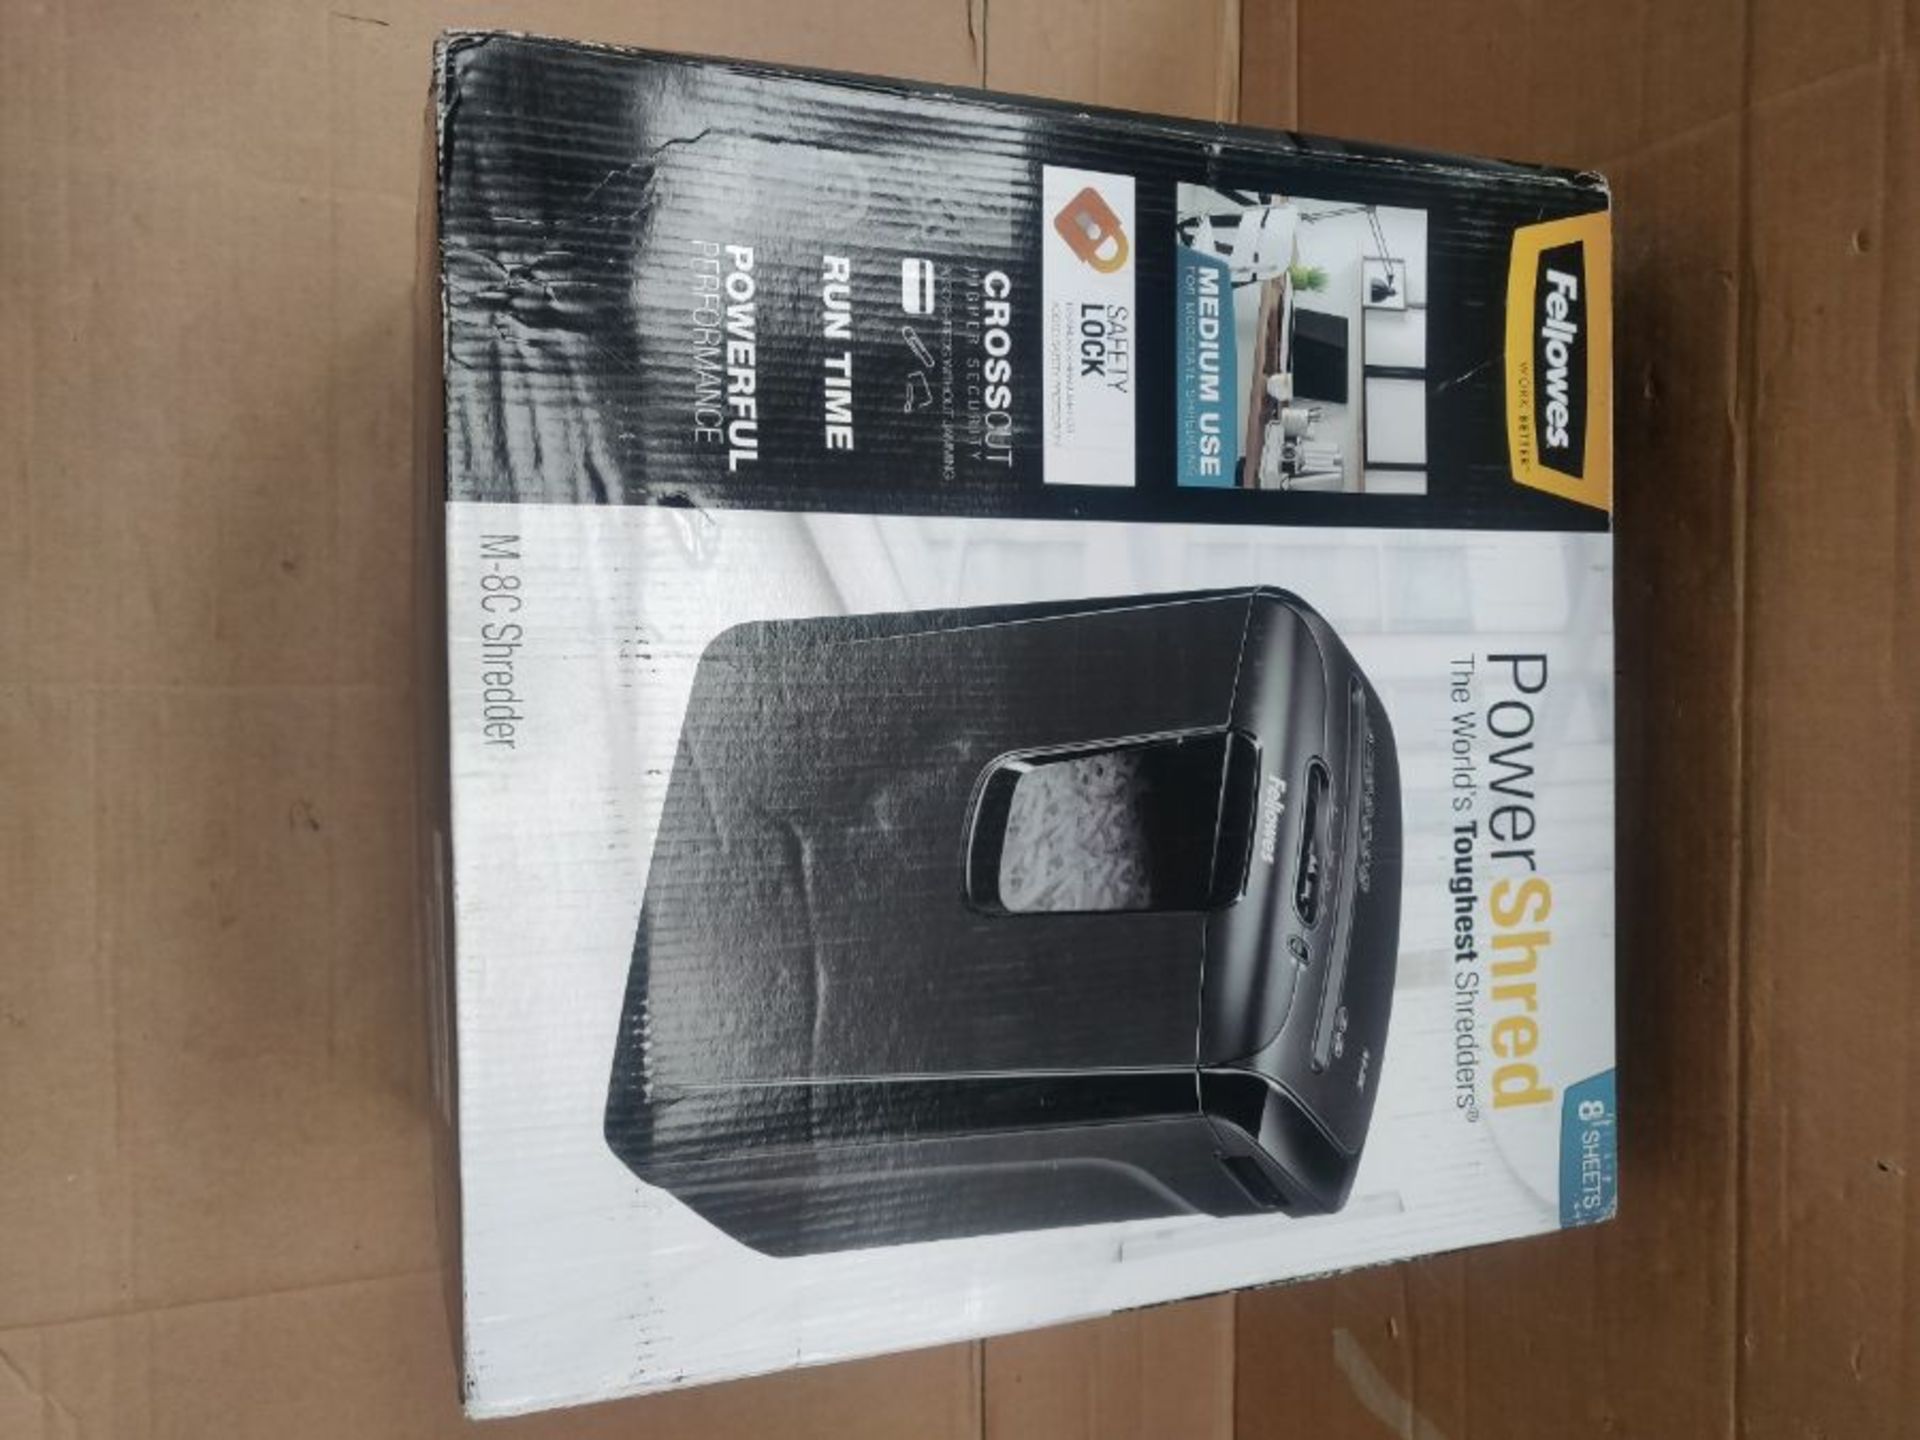 RRP £54.00 Fellowes Powershred M-8C 8 Sheet Cross Cut Personal Shredder with Safety Lock - Image 2 of 3